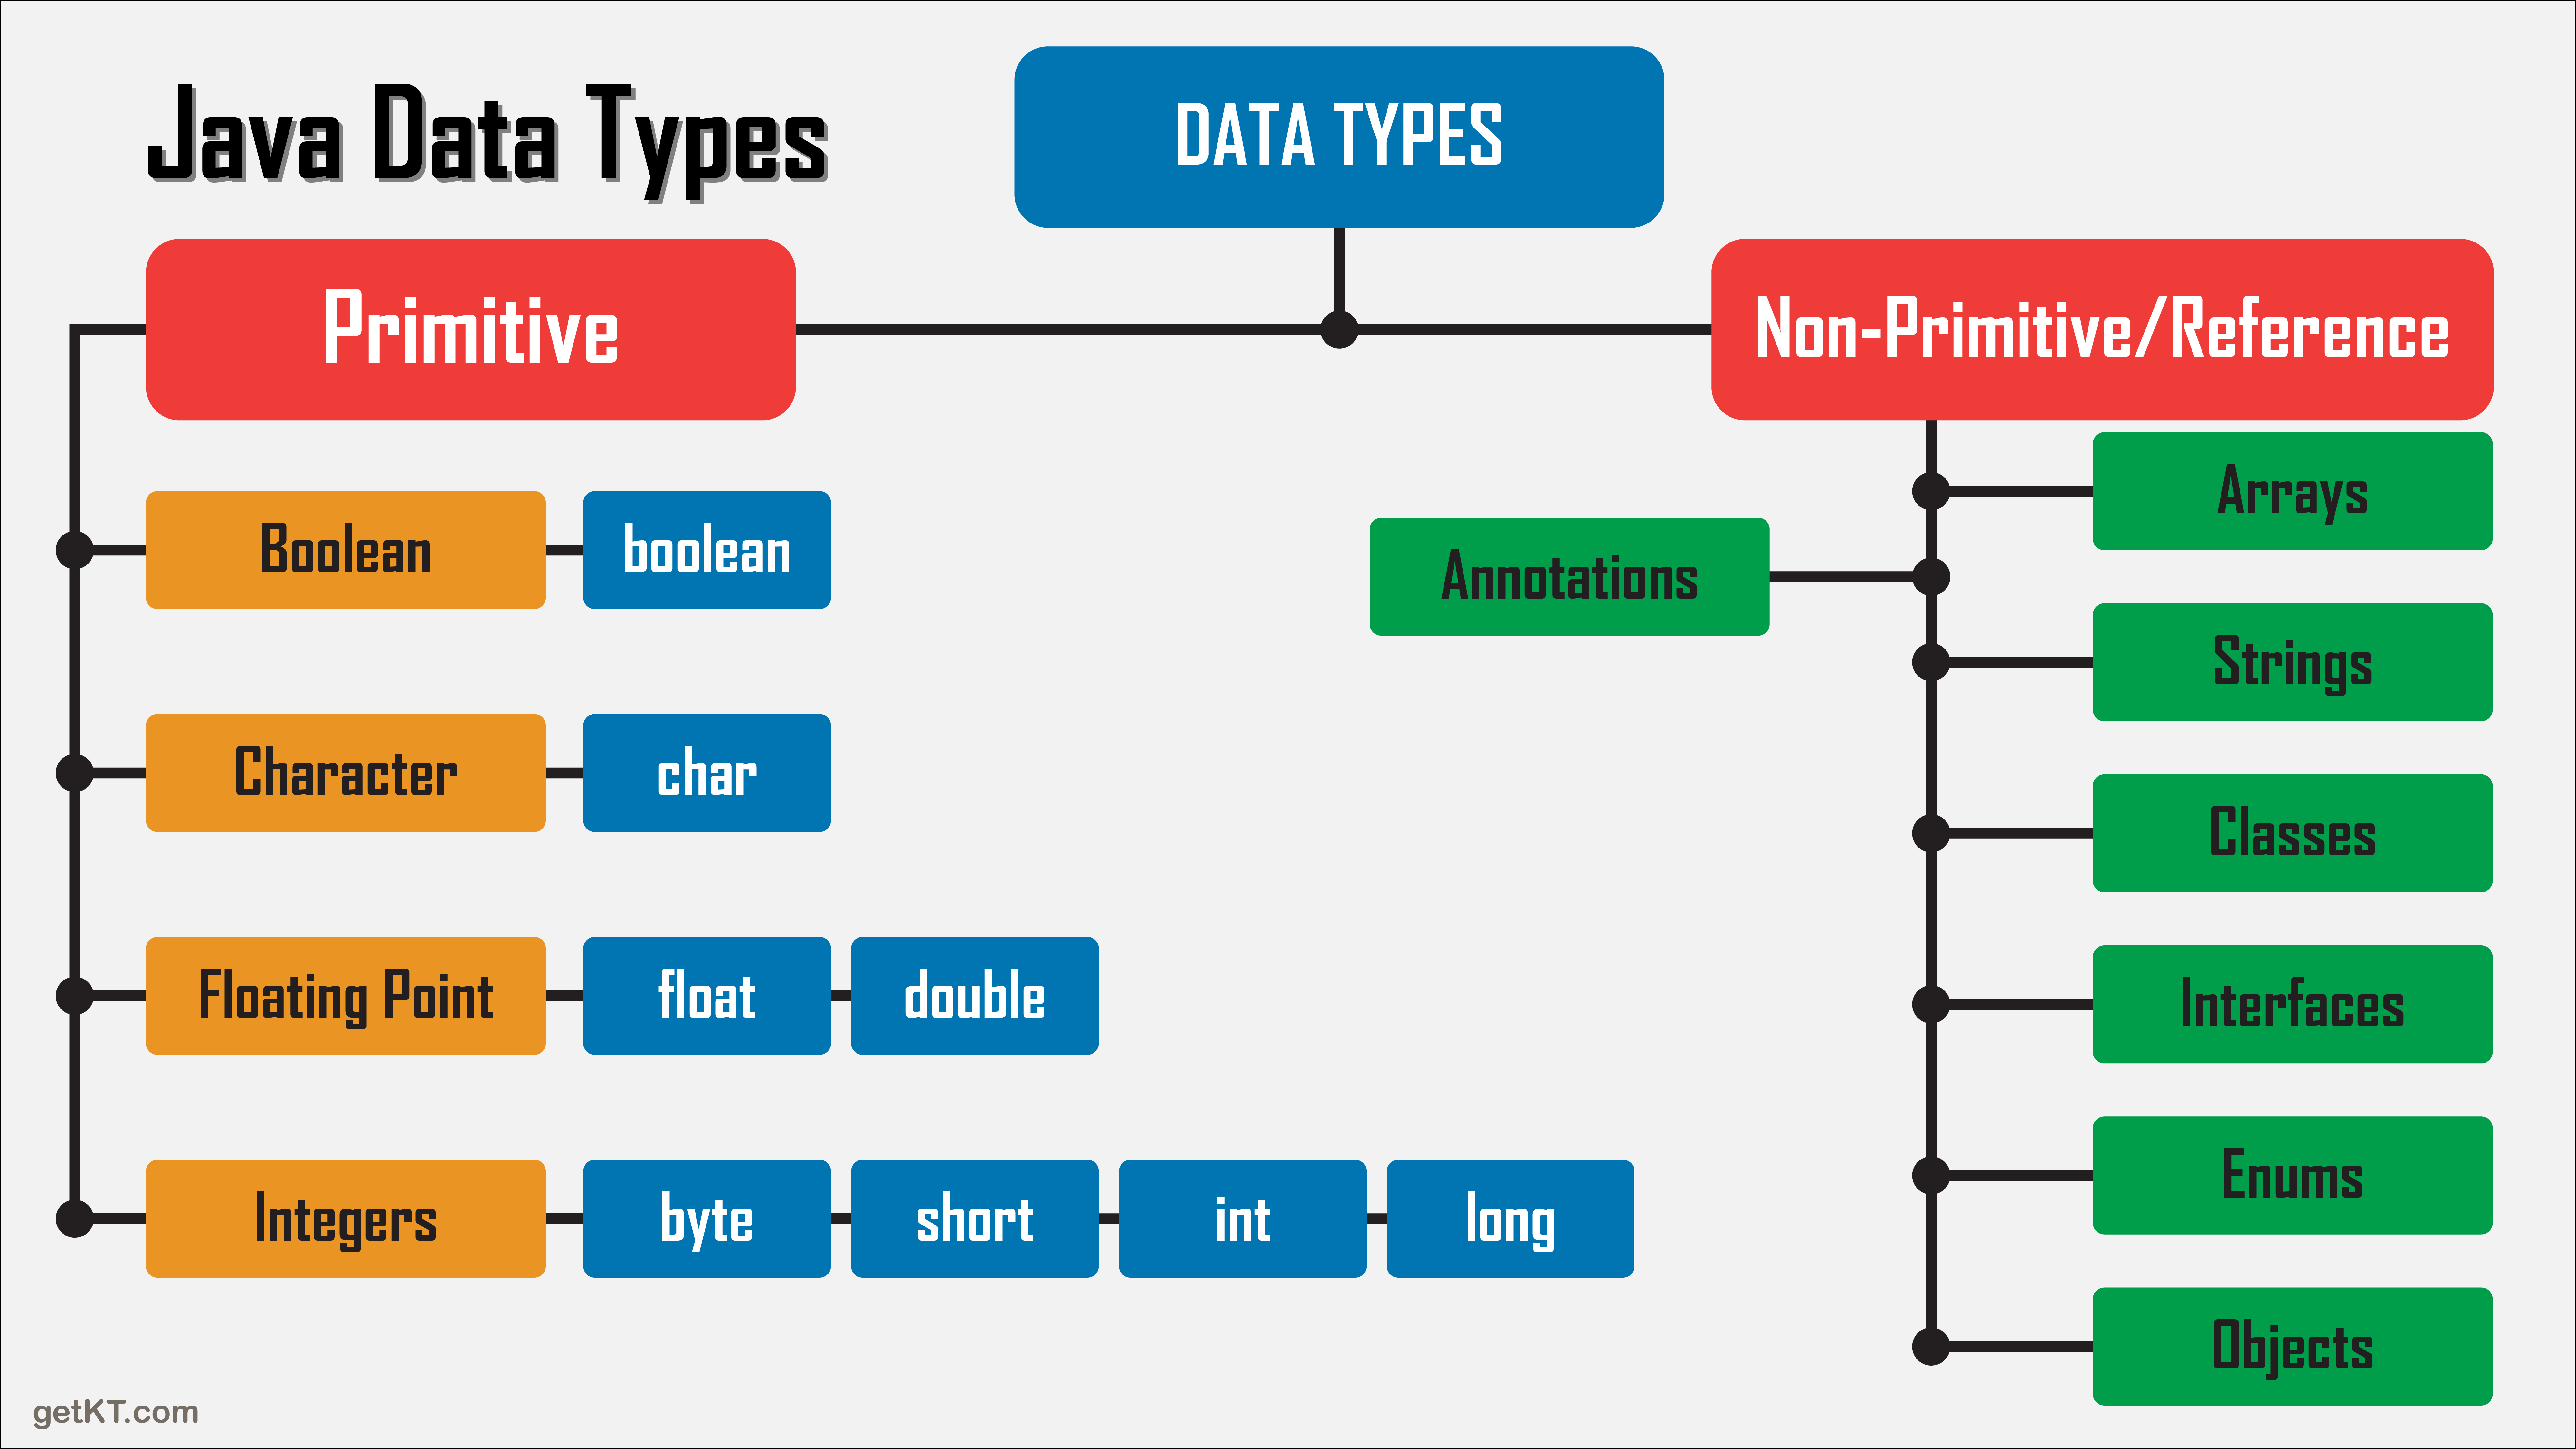 Complete set of Java DATA TYPES